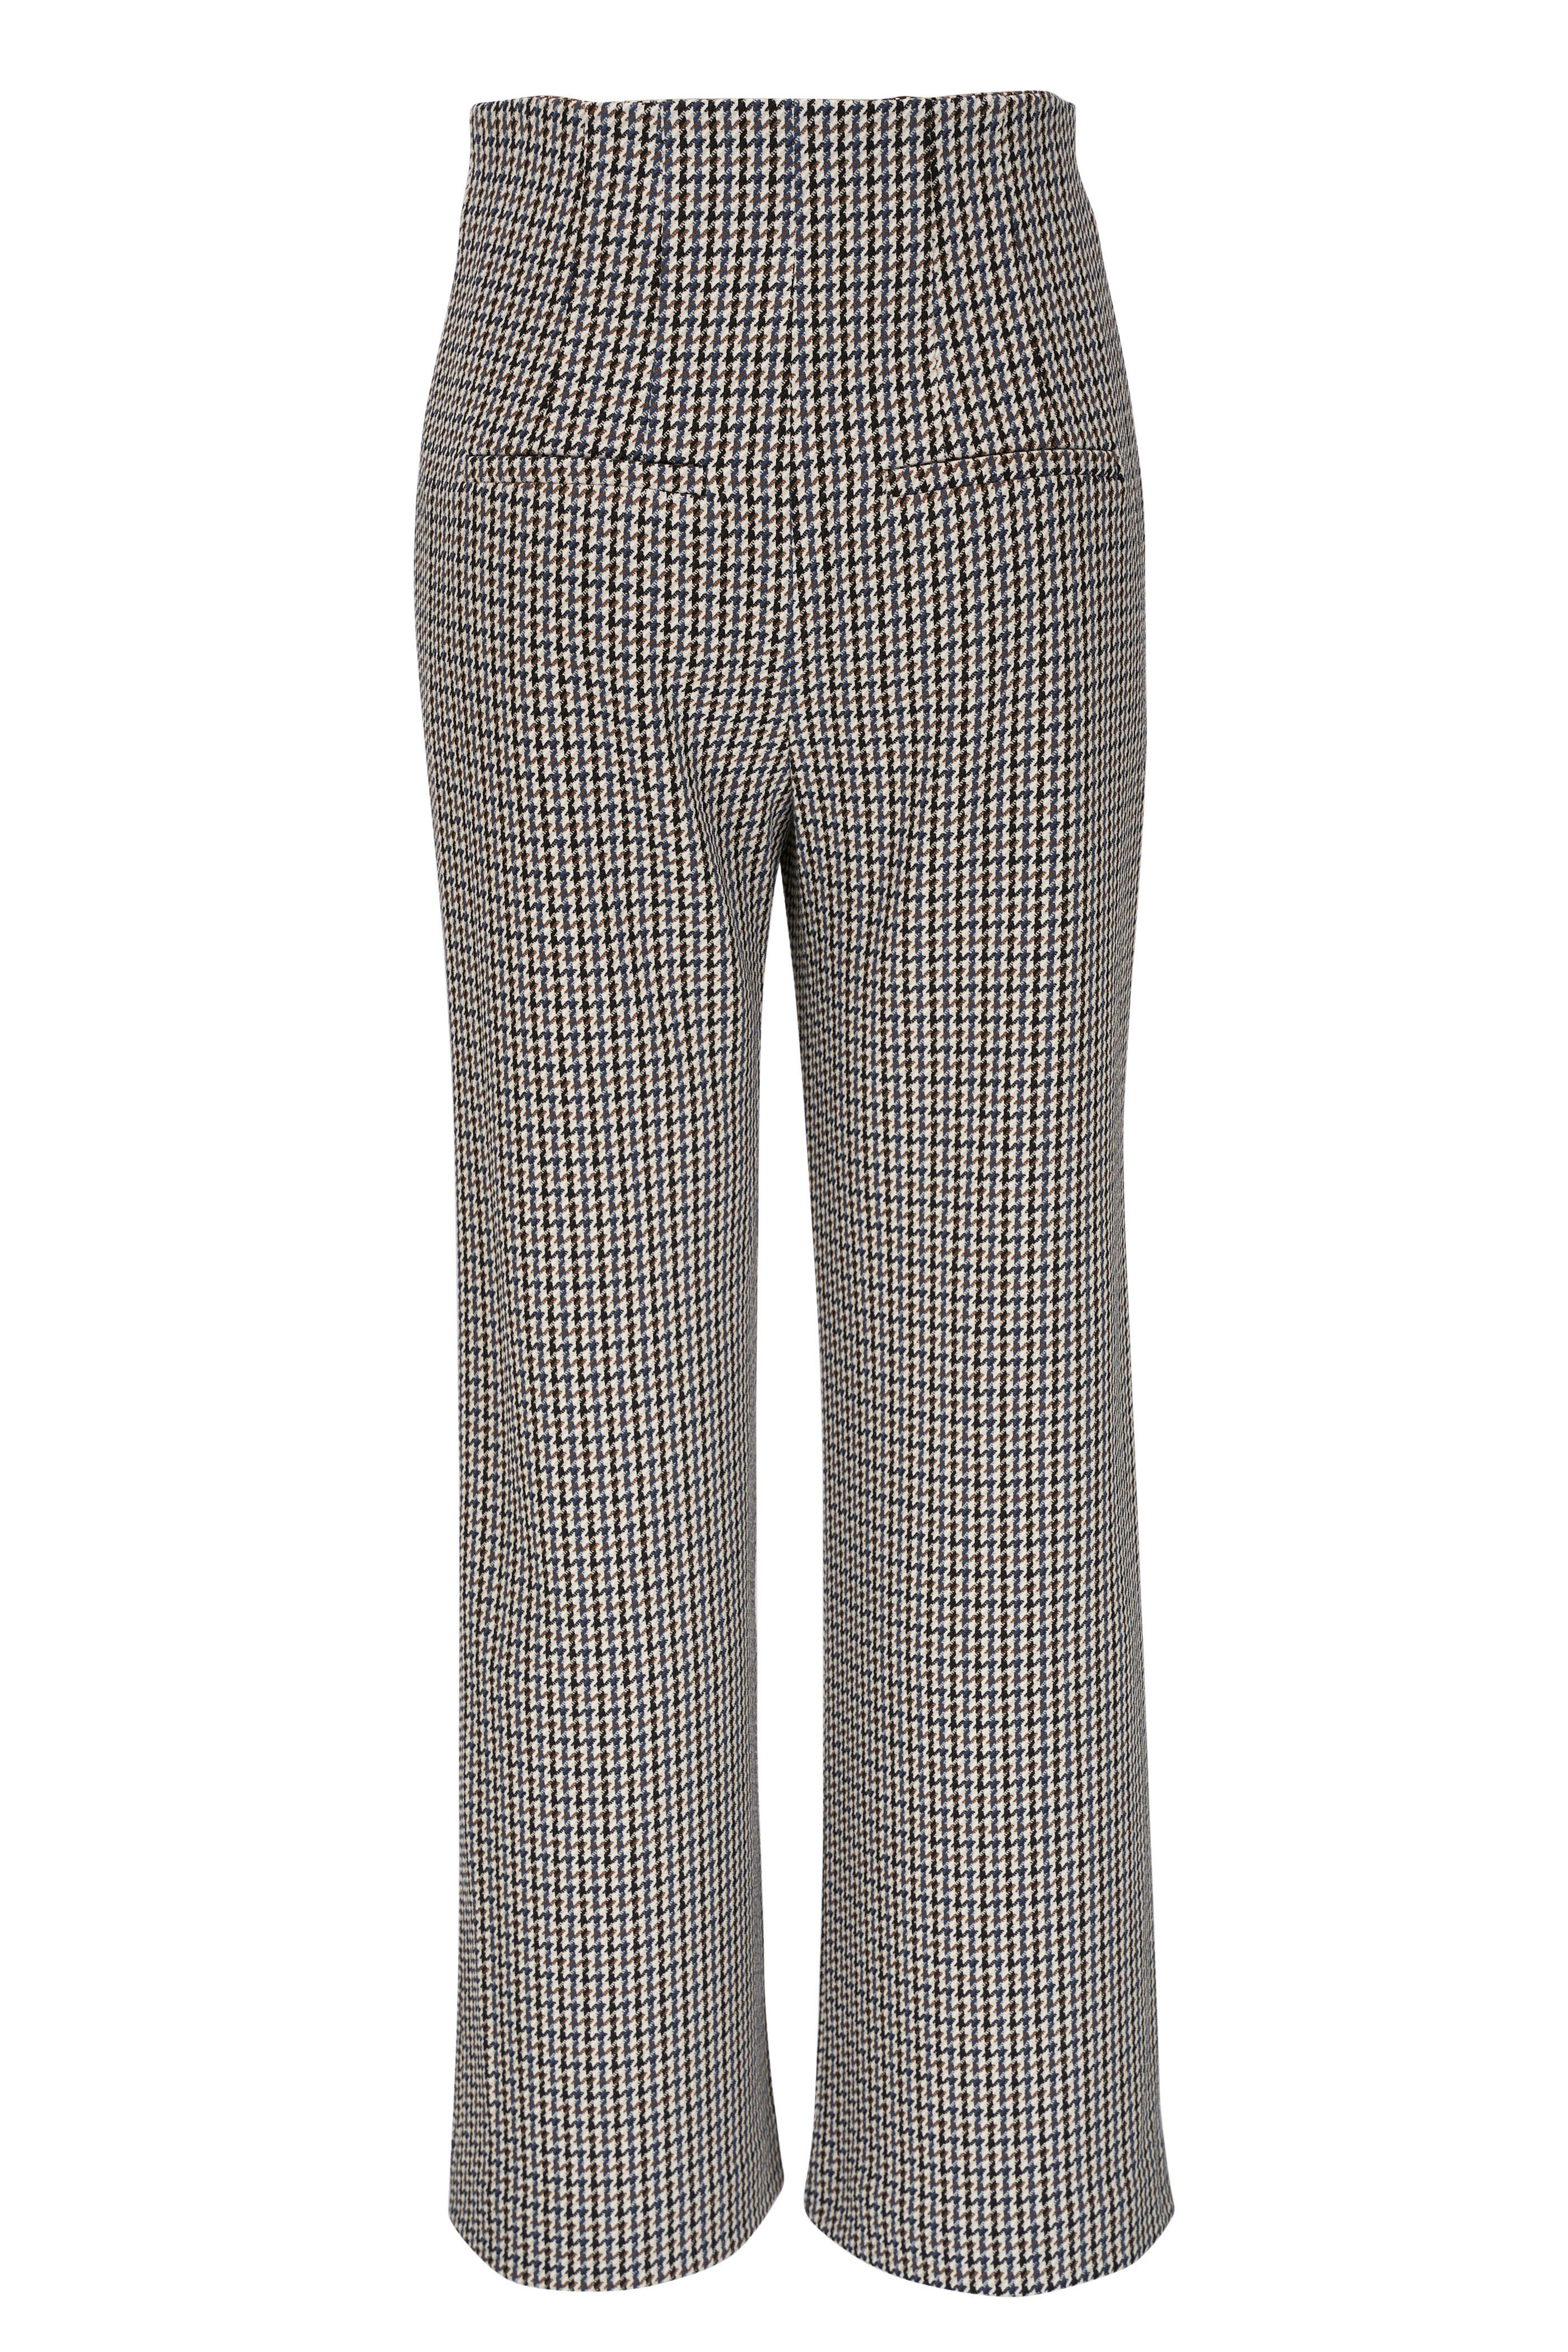 Veronica Beard - Dova Multi Houndstooth Pant | Mitchell Stores